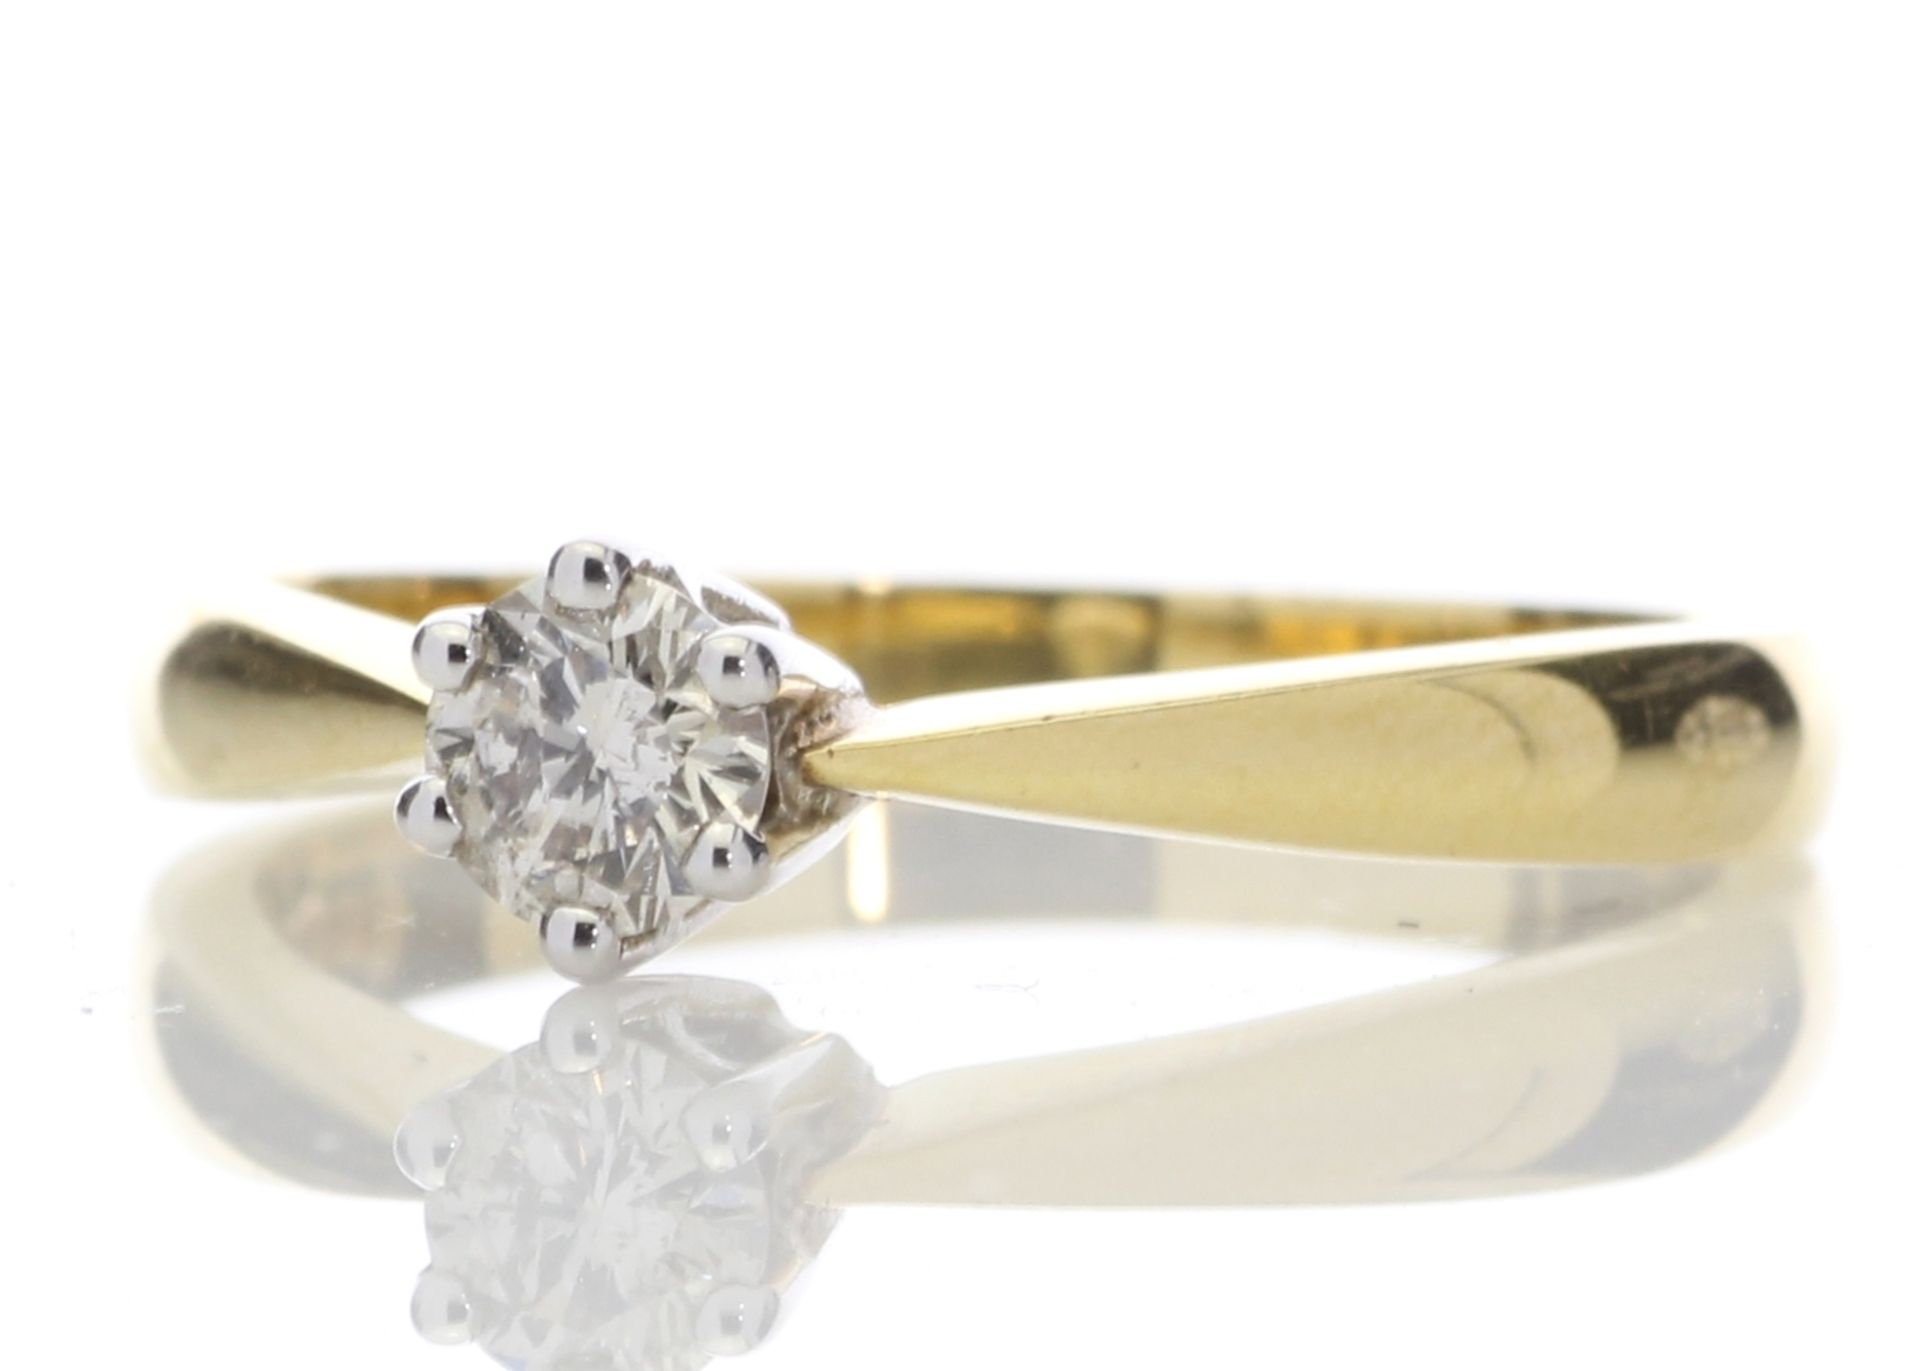 18ct Yellow Gold Single Stone Six Claw Set Diamond Ring 0.25 Carats - Valued by AGI £1,720.00 - This - Image 2 of 4